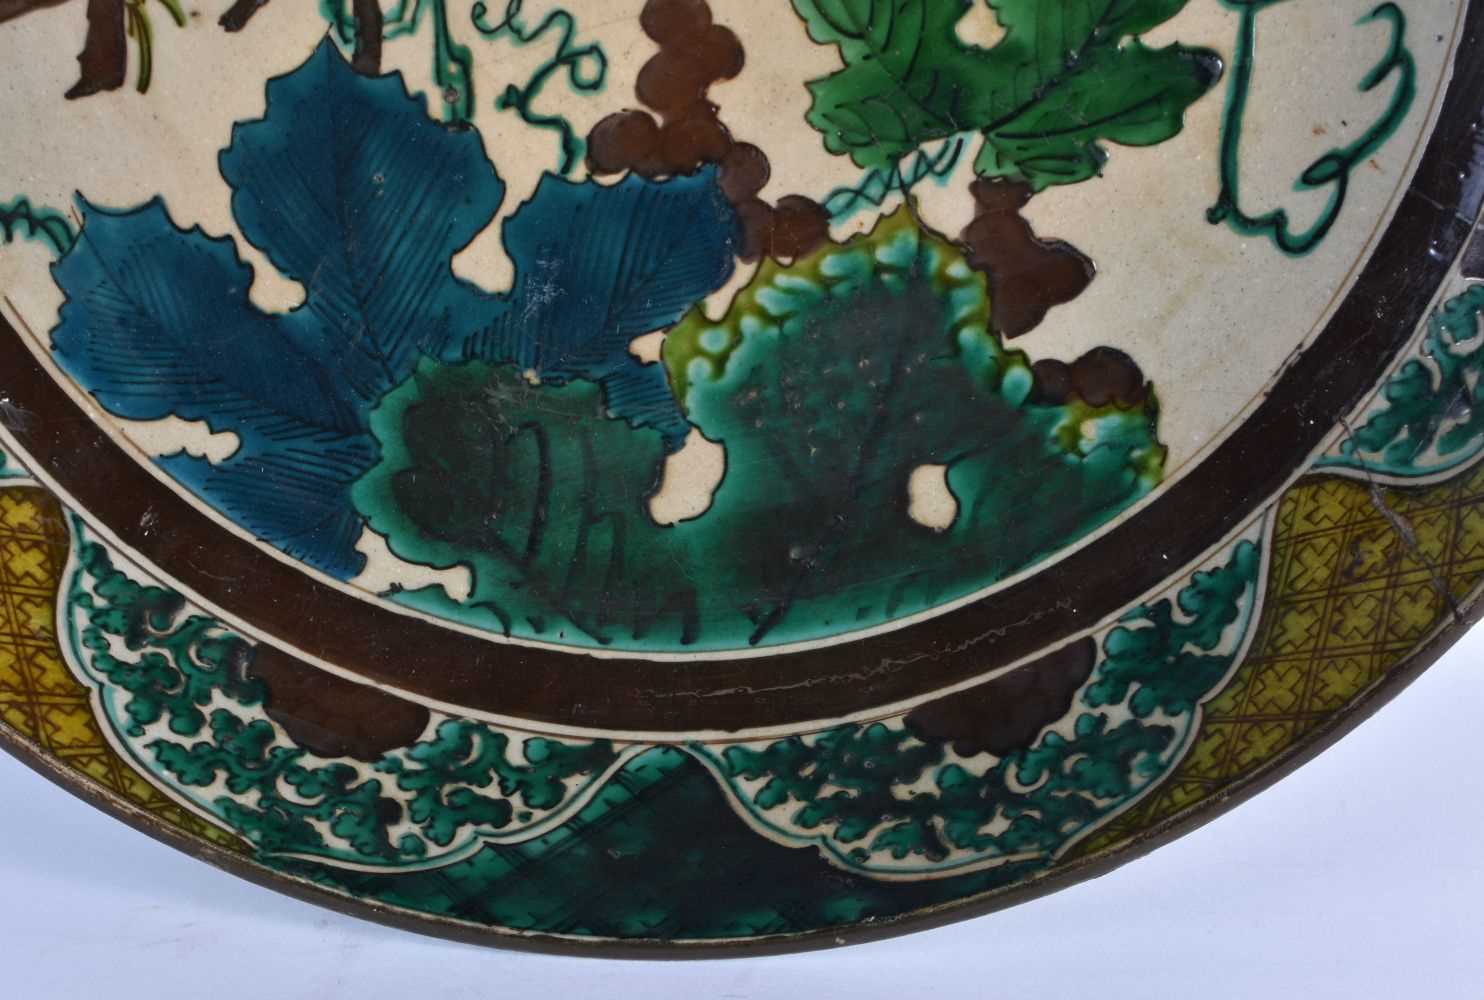 A LARGE 18TH CENTURY JAPANESE EDO PERIOD AO KUTANI DISH painted with flowers and landscapes. 37 cm - Image 3 of 6